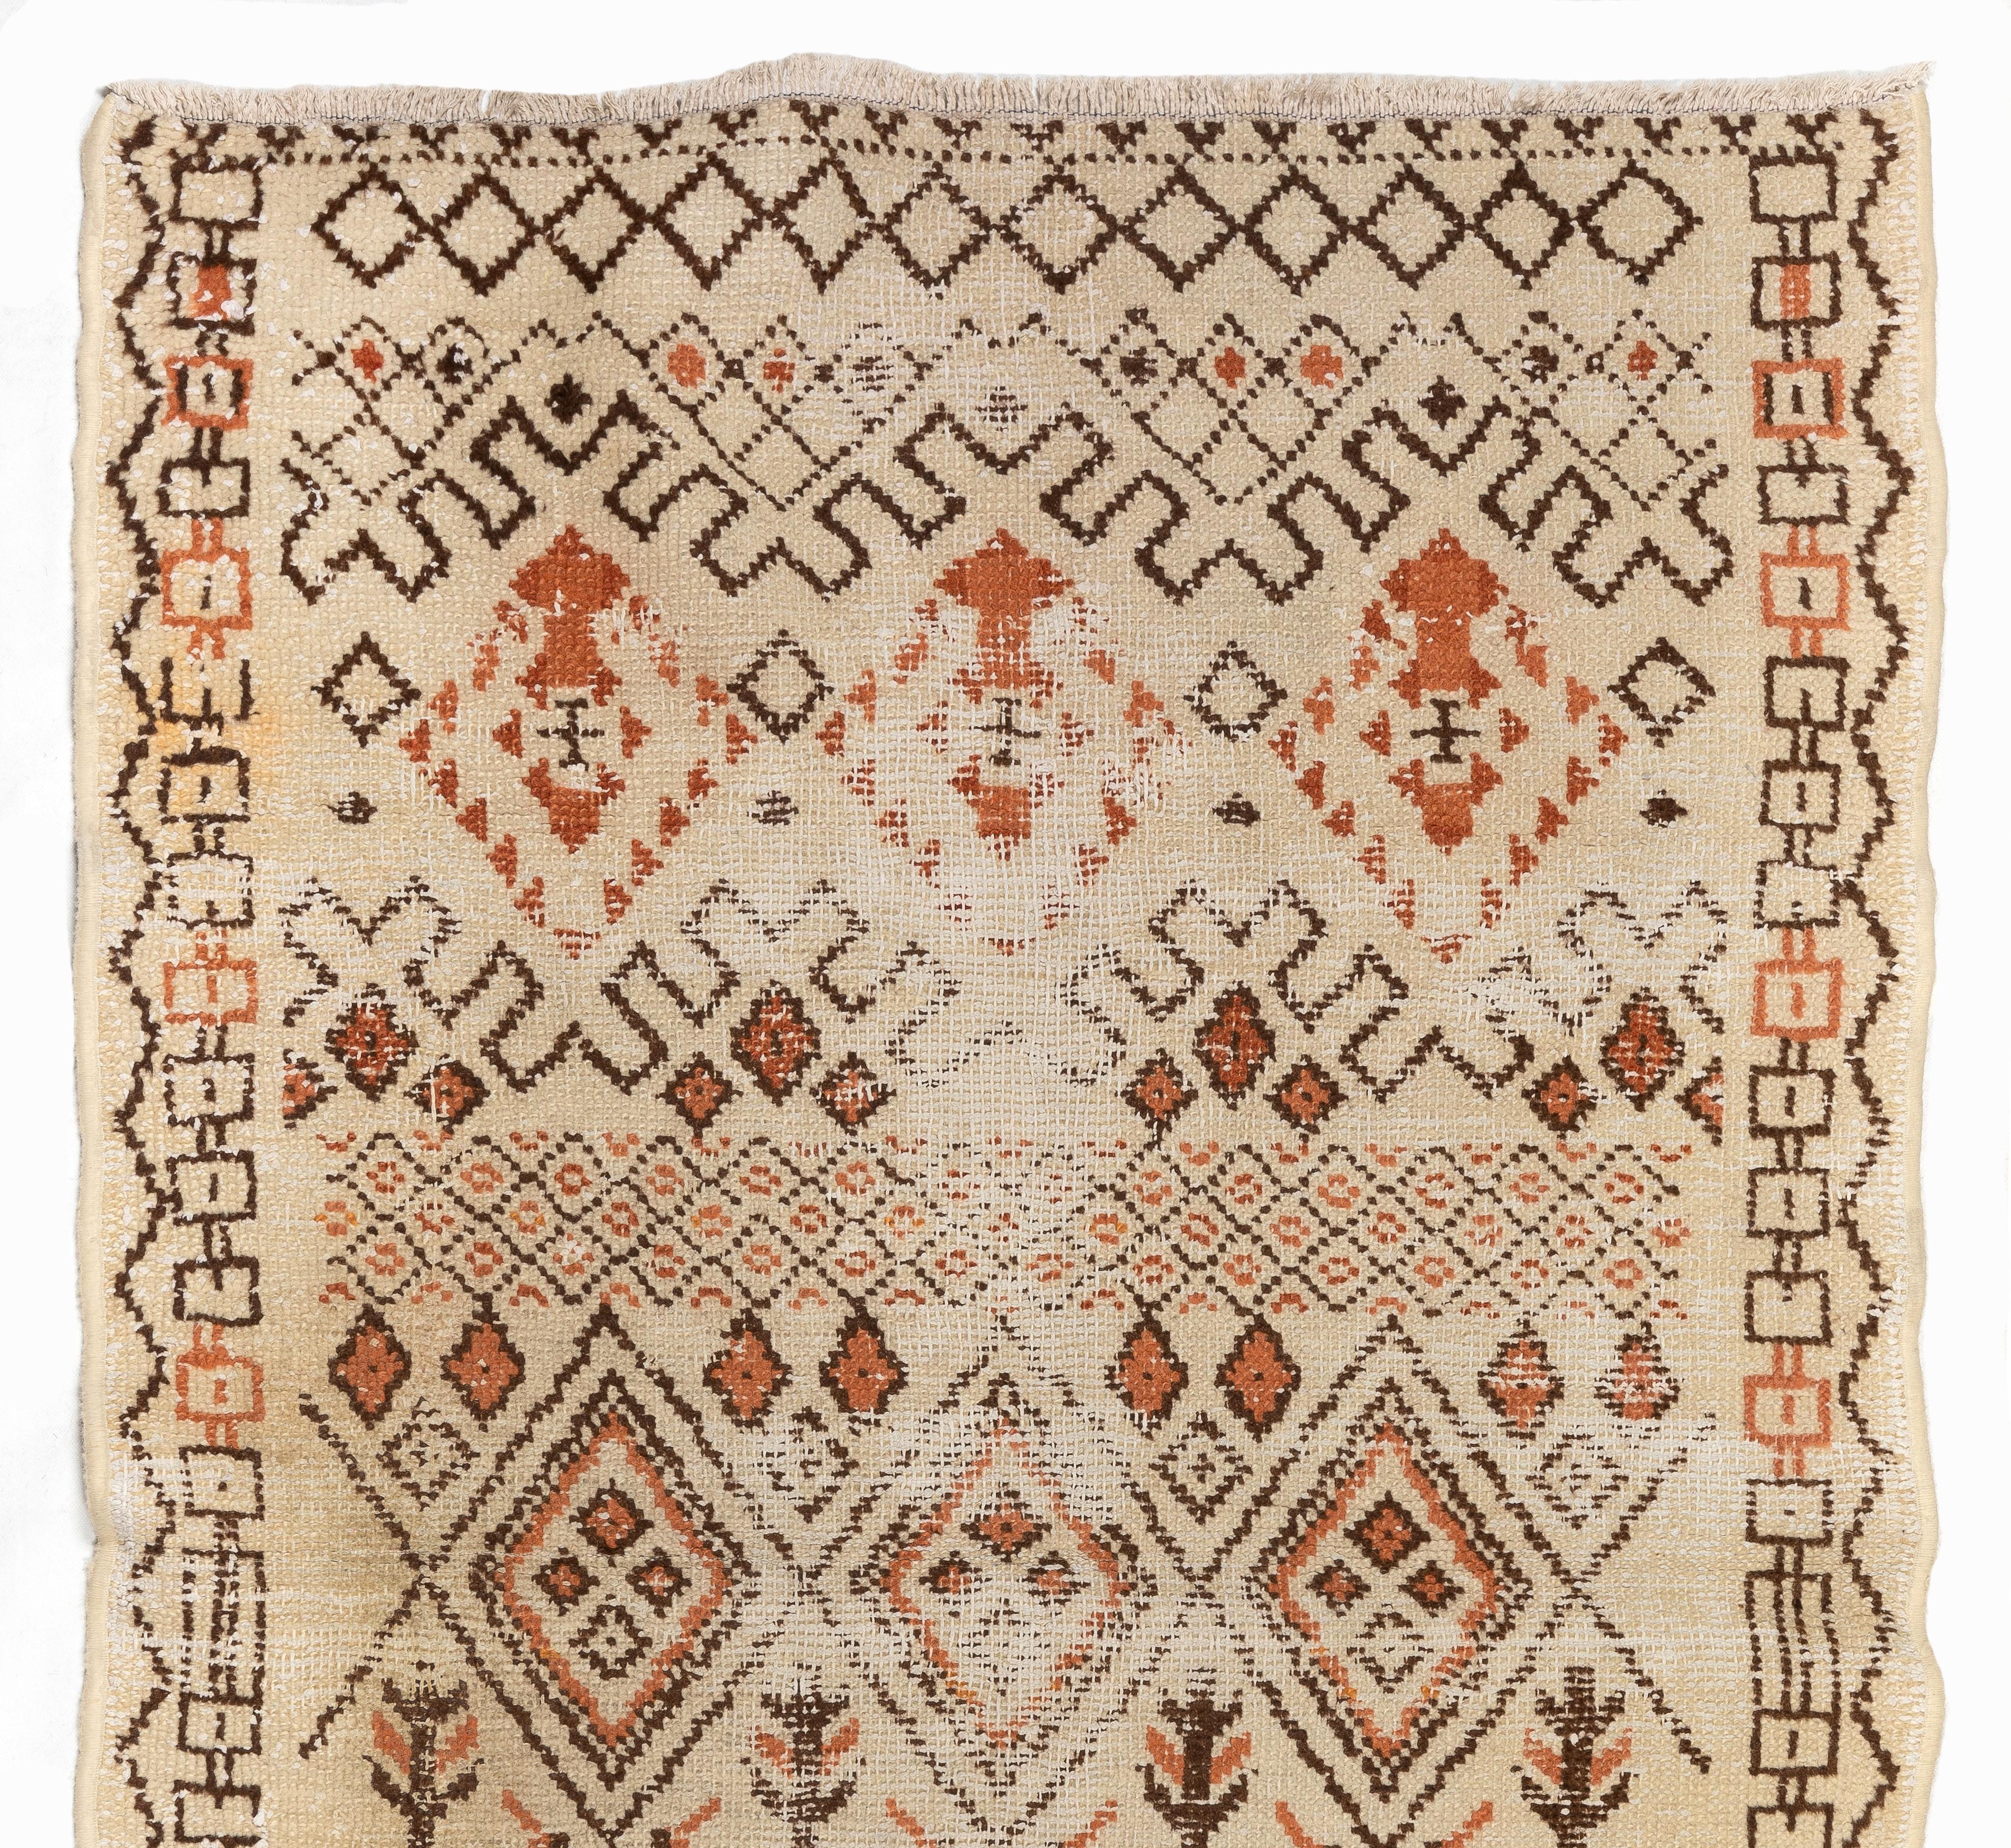 An antique Turkish tribal rug with a unique, whimsical design of bold geometric motifs in soft earthy colors of cream, rust orange and brown. The field is divided into three areas, each of which is decorated with its own distinct diamond shapes and